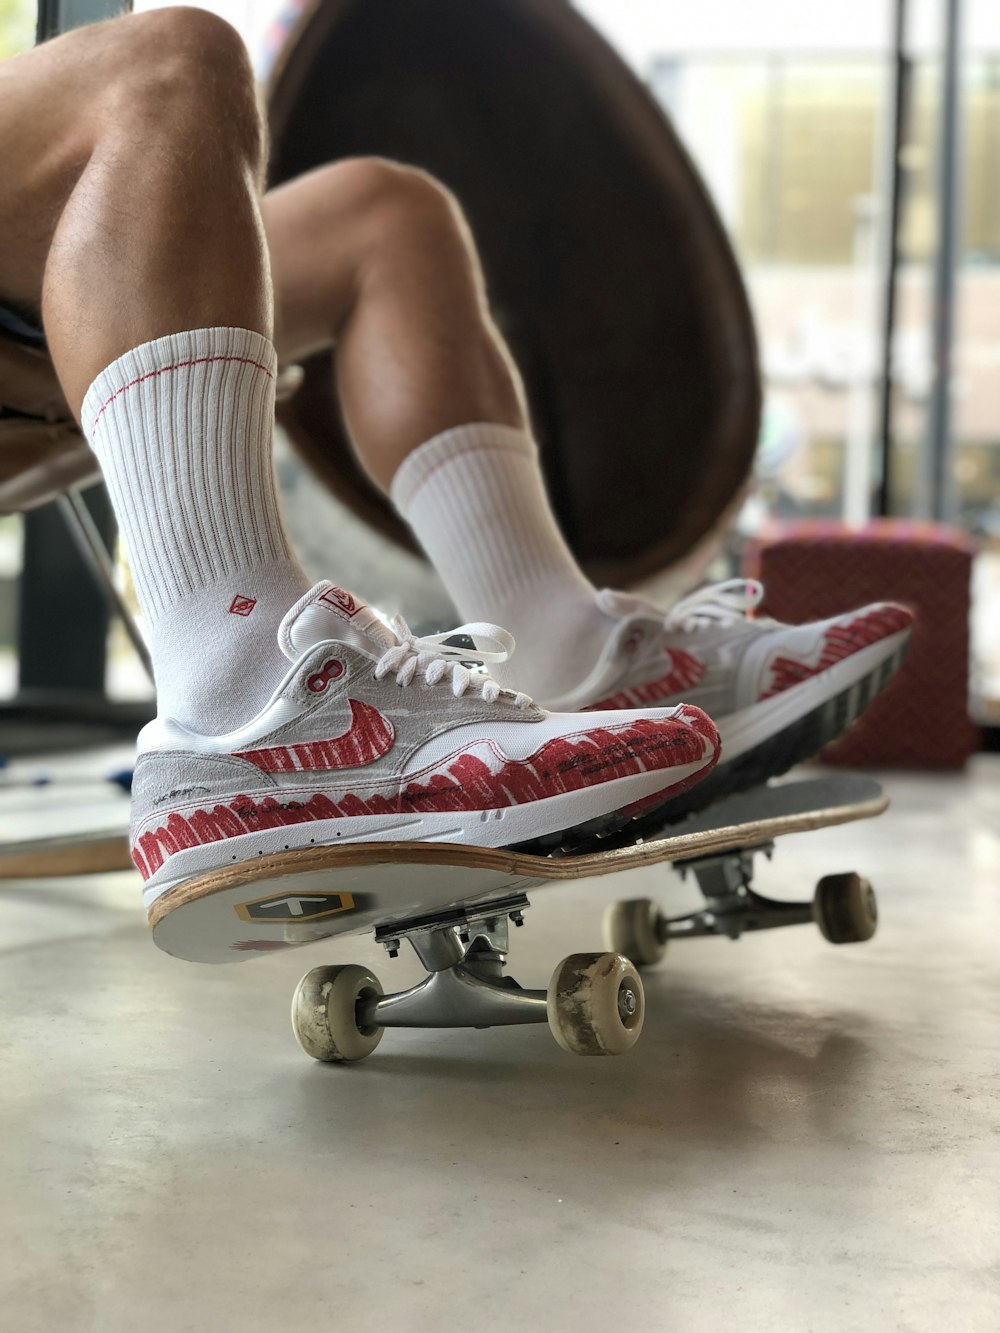 a person sitting on a skateboard in a gym